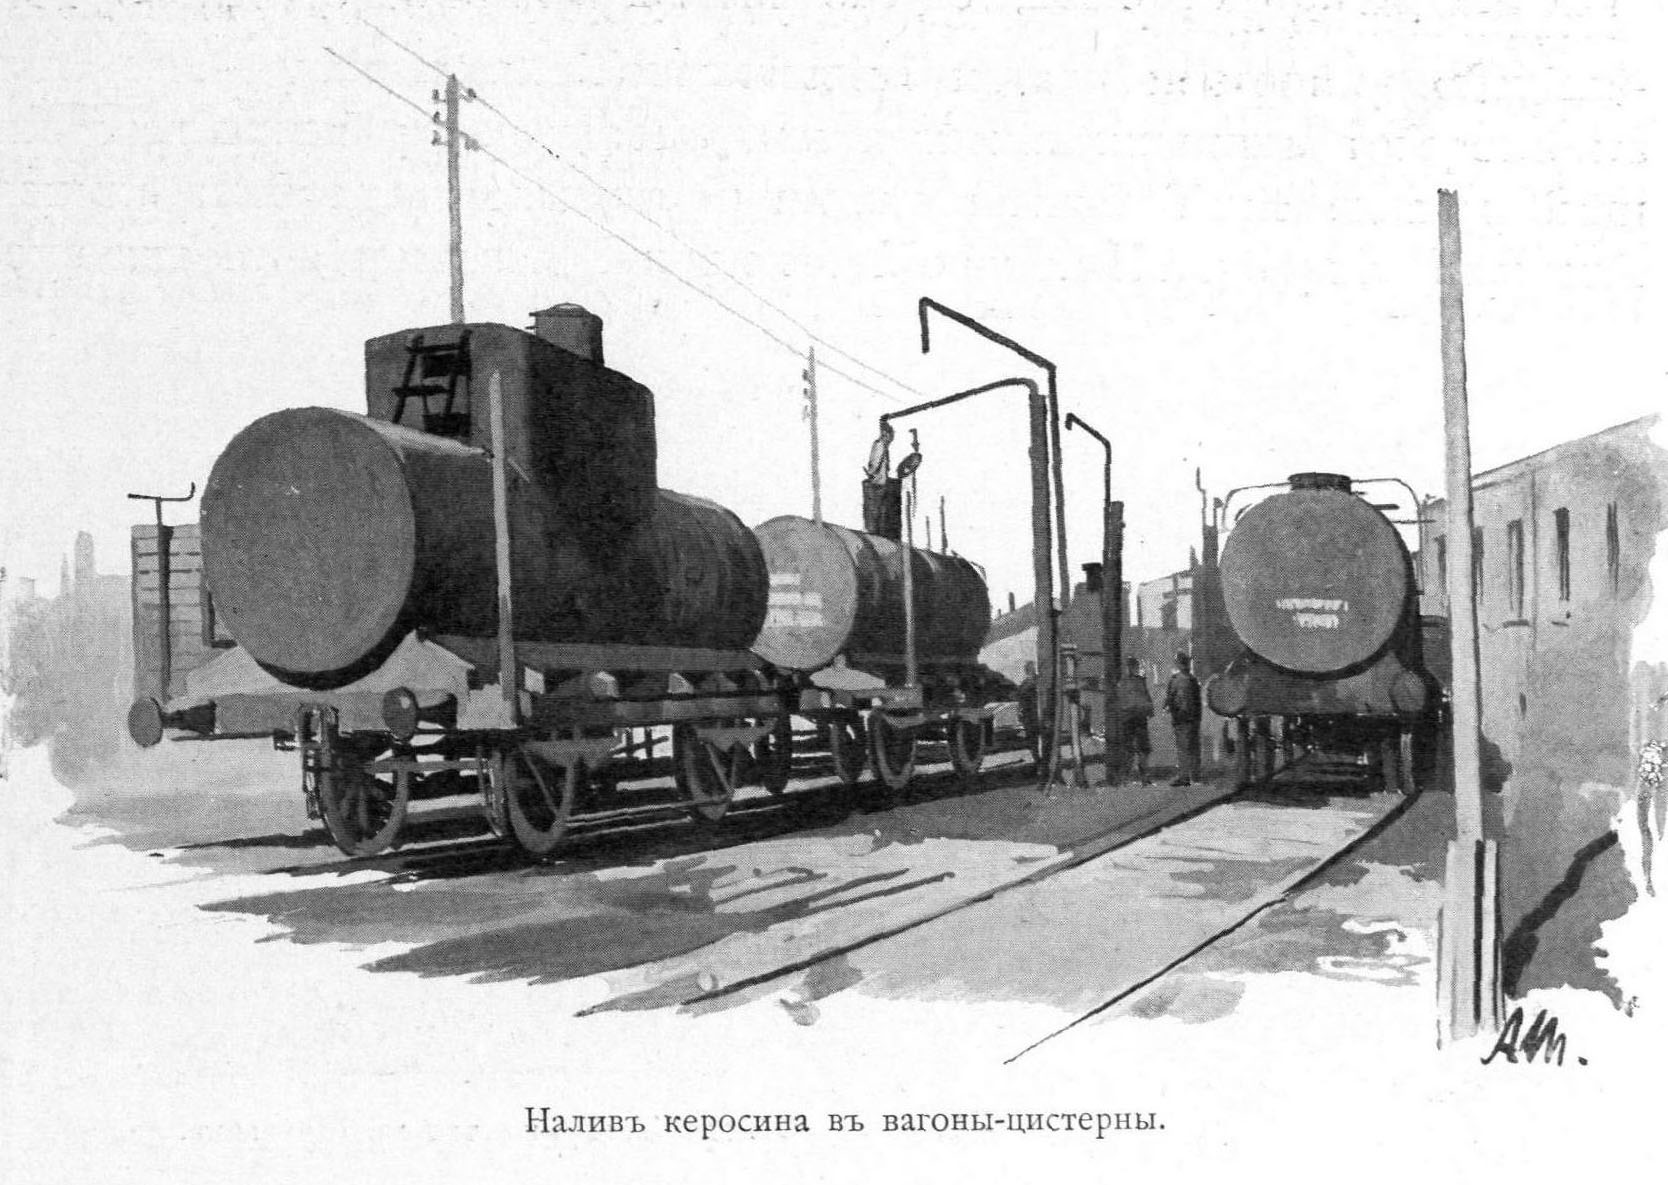 Despite the high transportation costs, railway was often the only solution for the supply of paraffin to the distant cities in vast Russia.